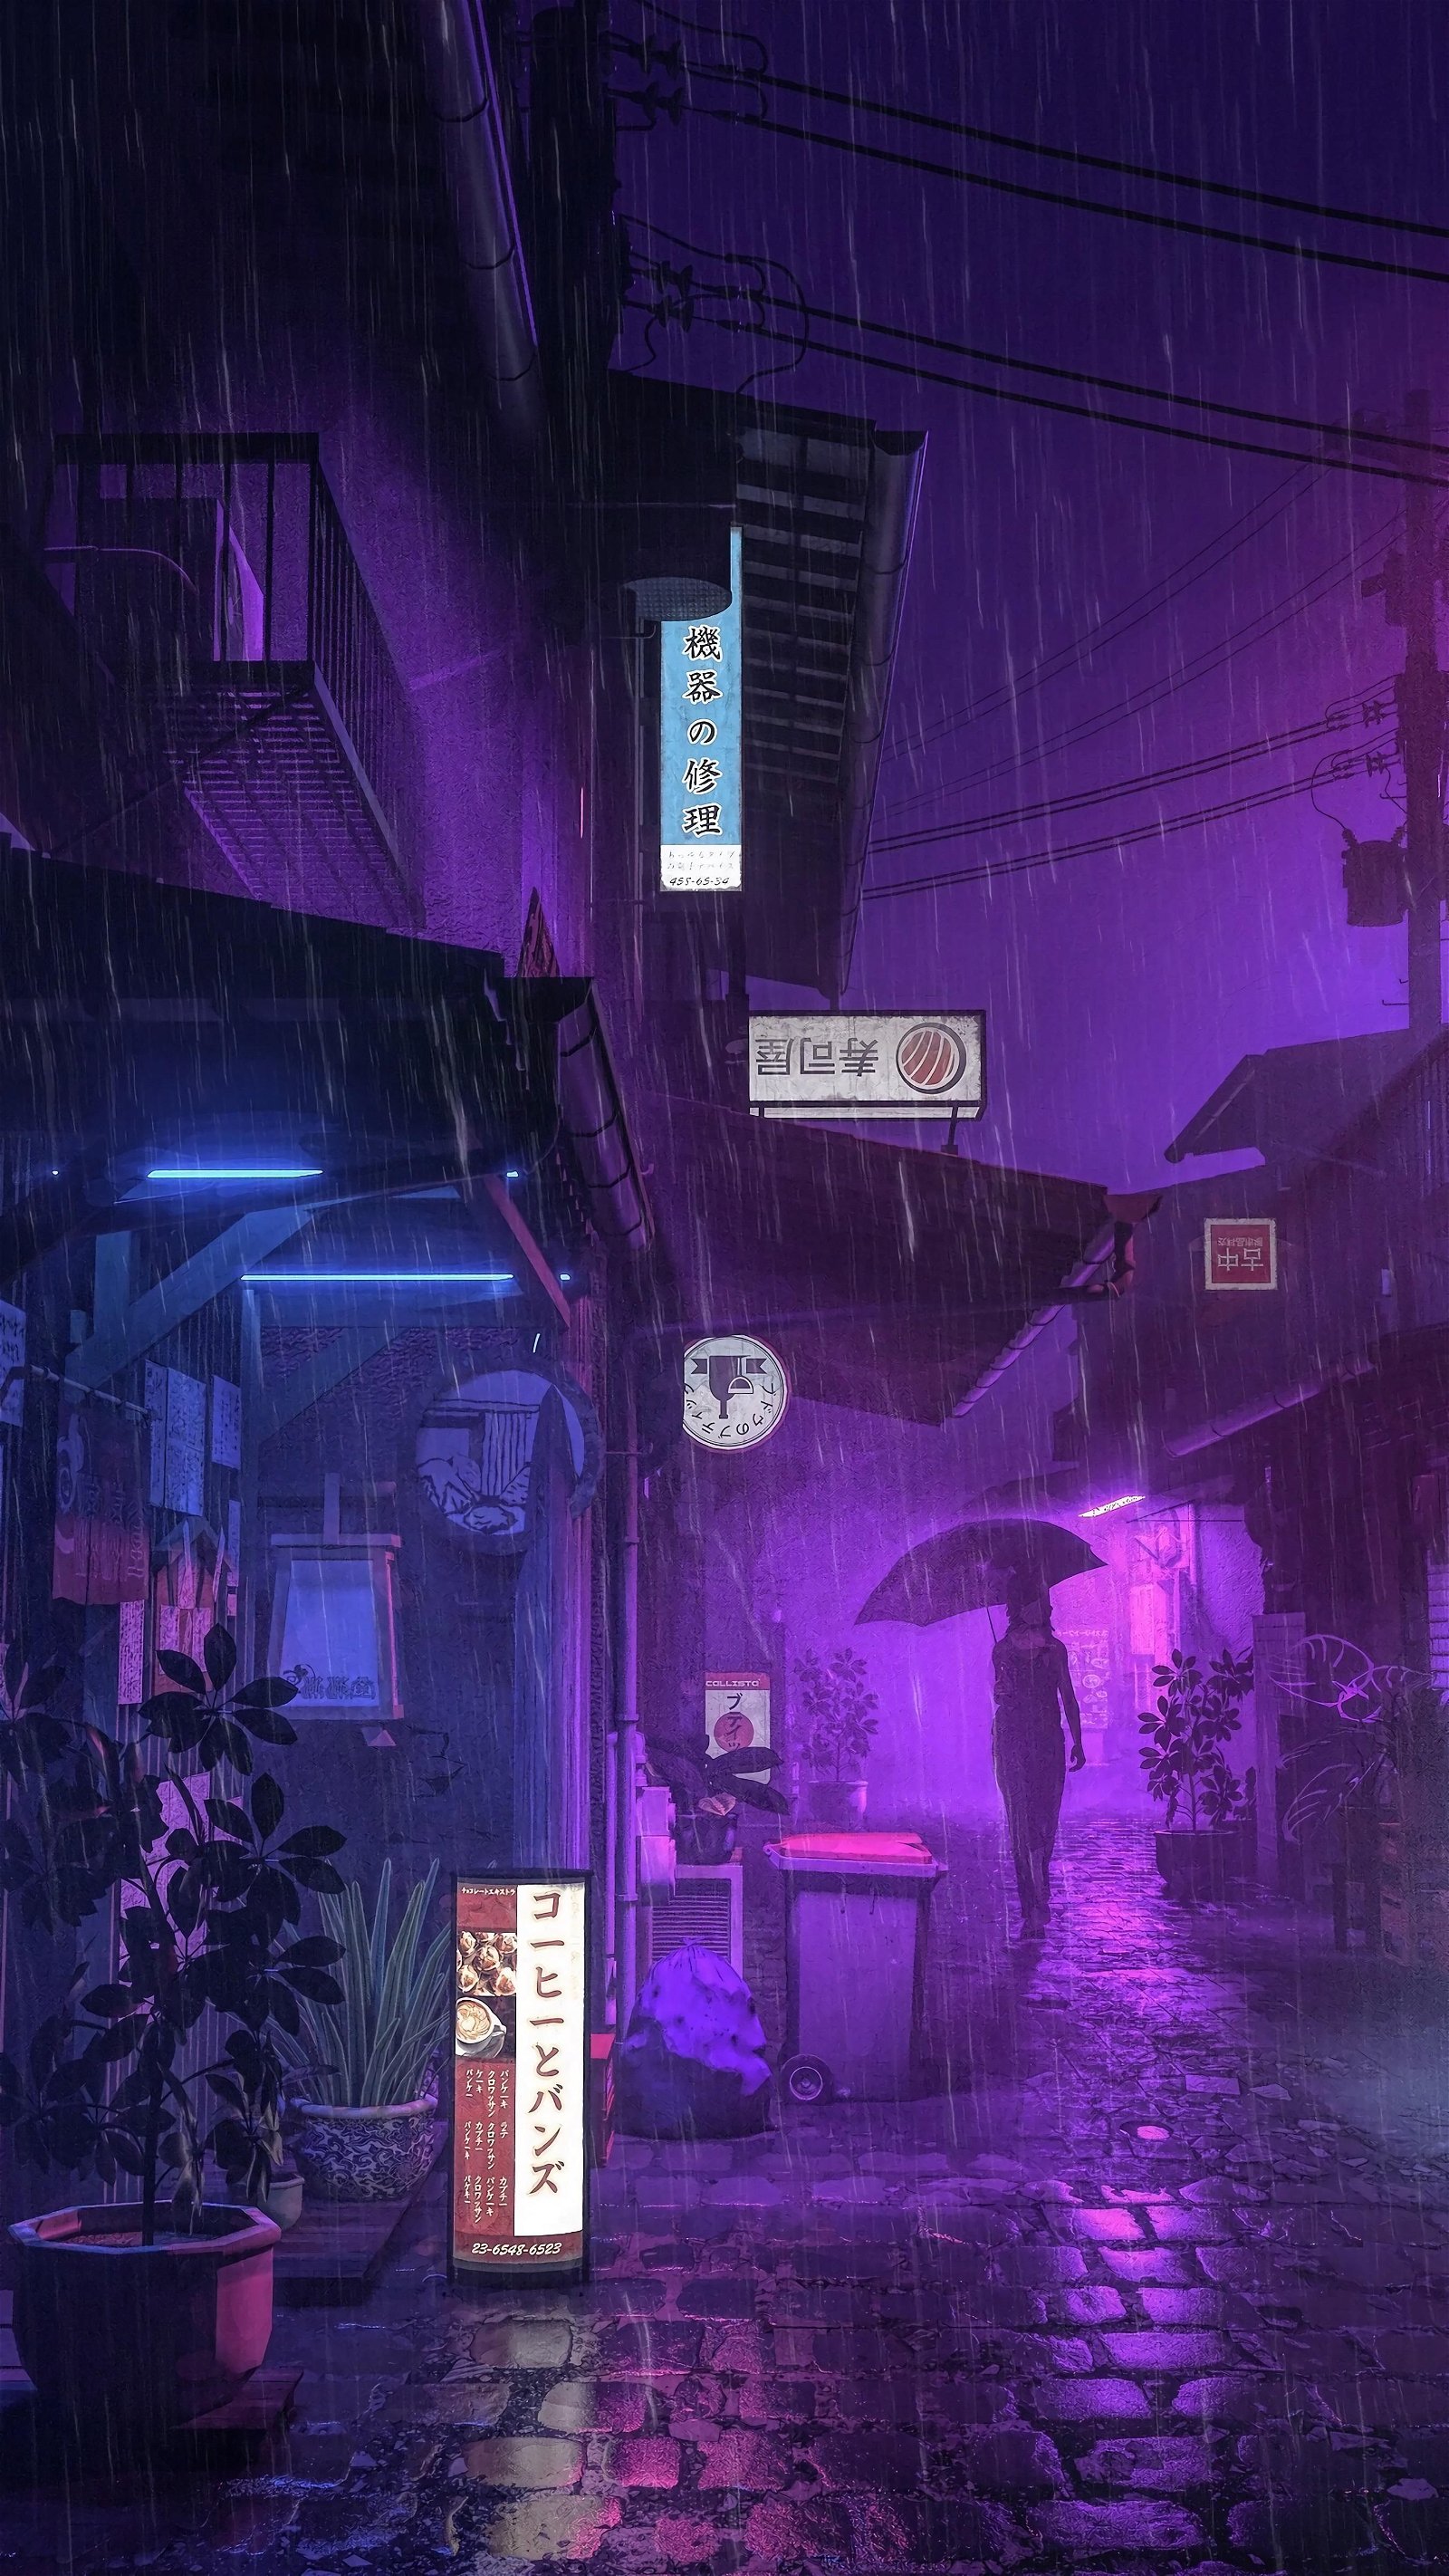 Aesthetic - Anime City Wallpaper Download | MobCup